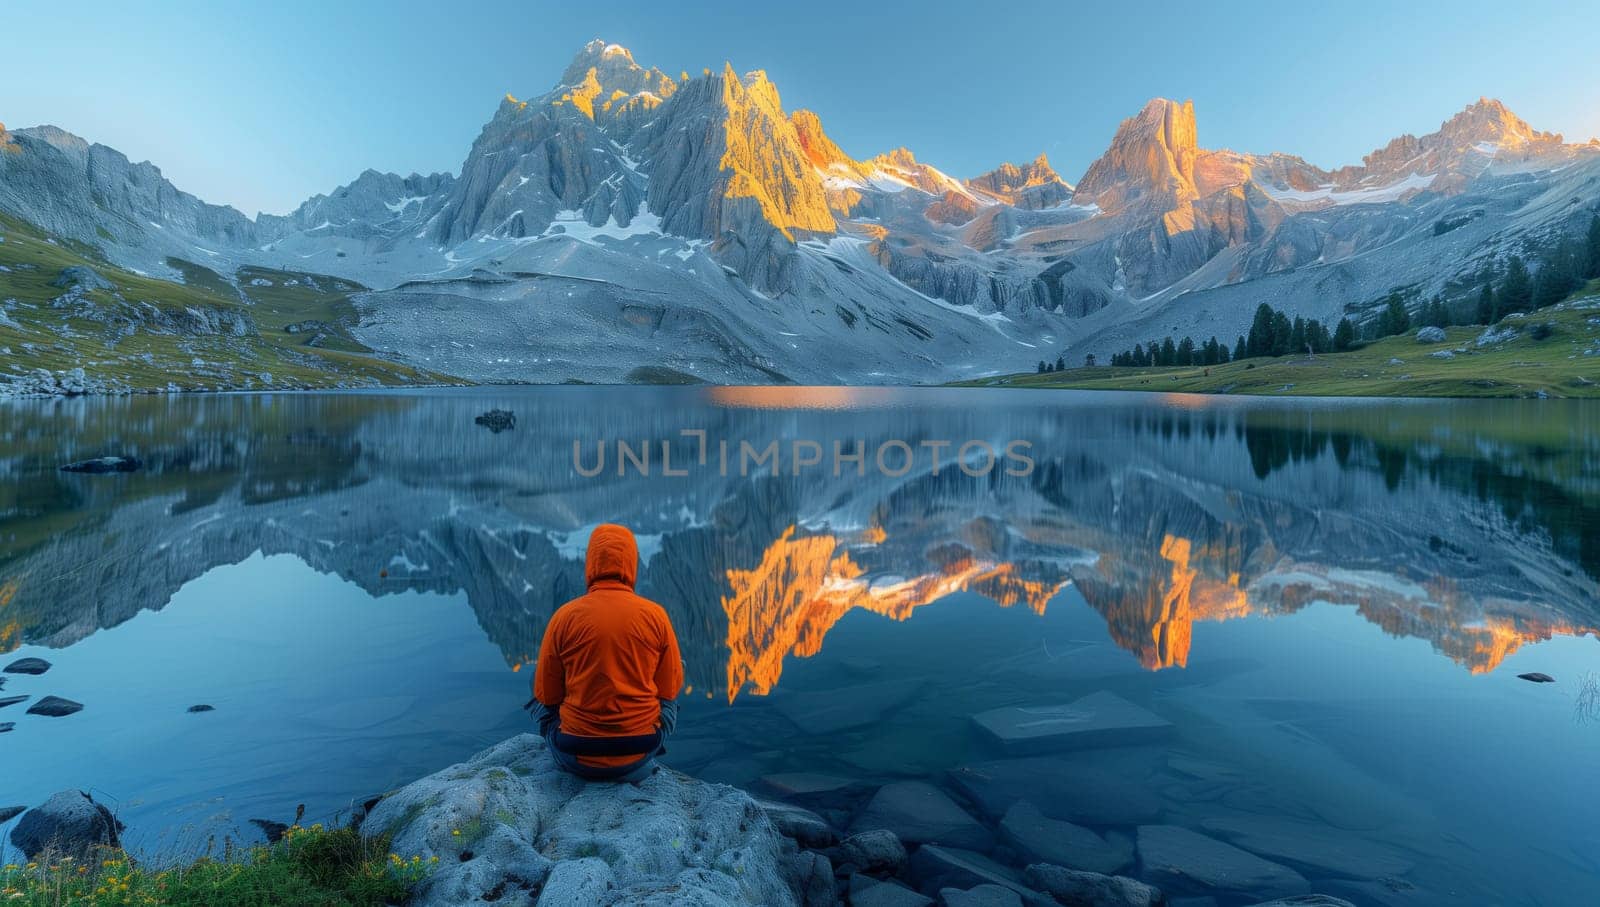 a person is sitting on a rock near a lake with mountains in the background by richwolf